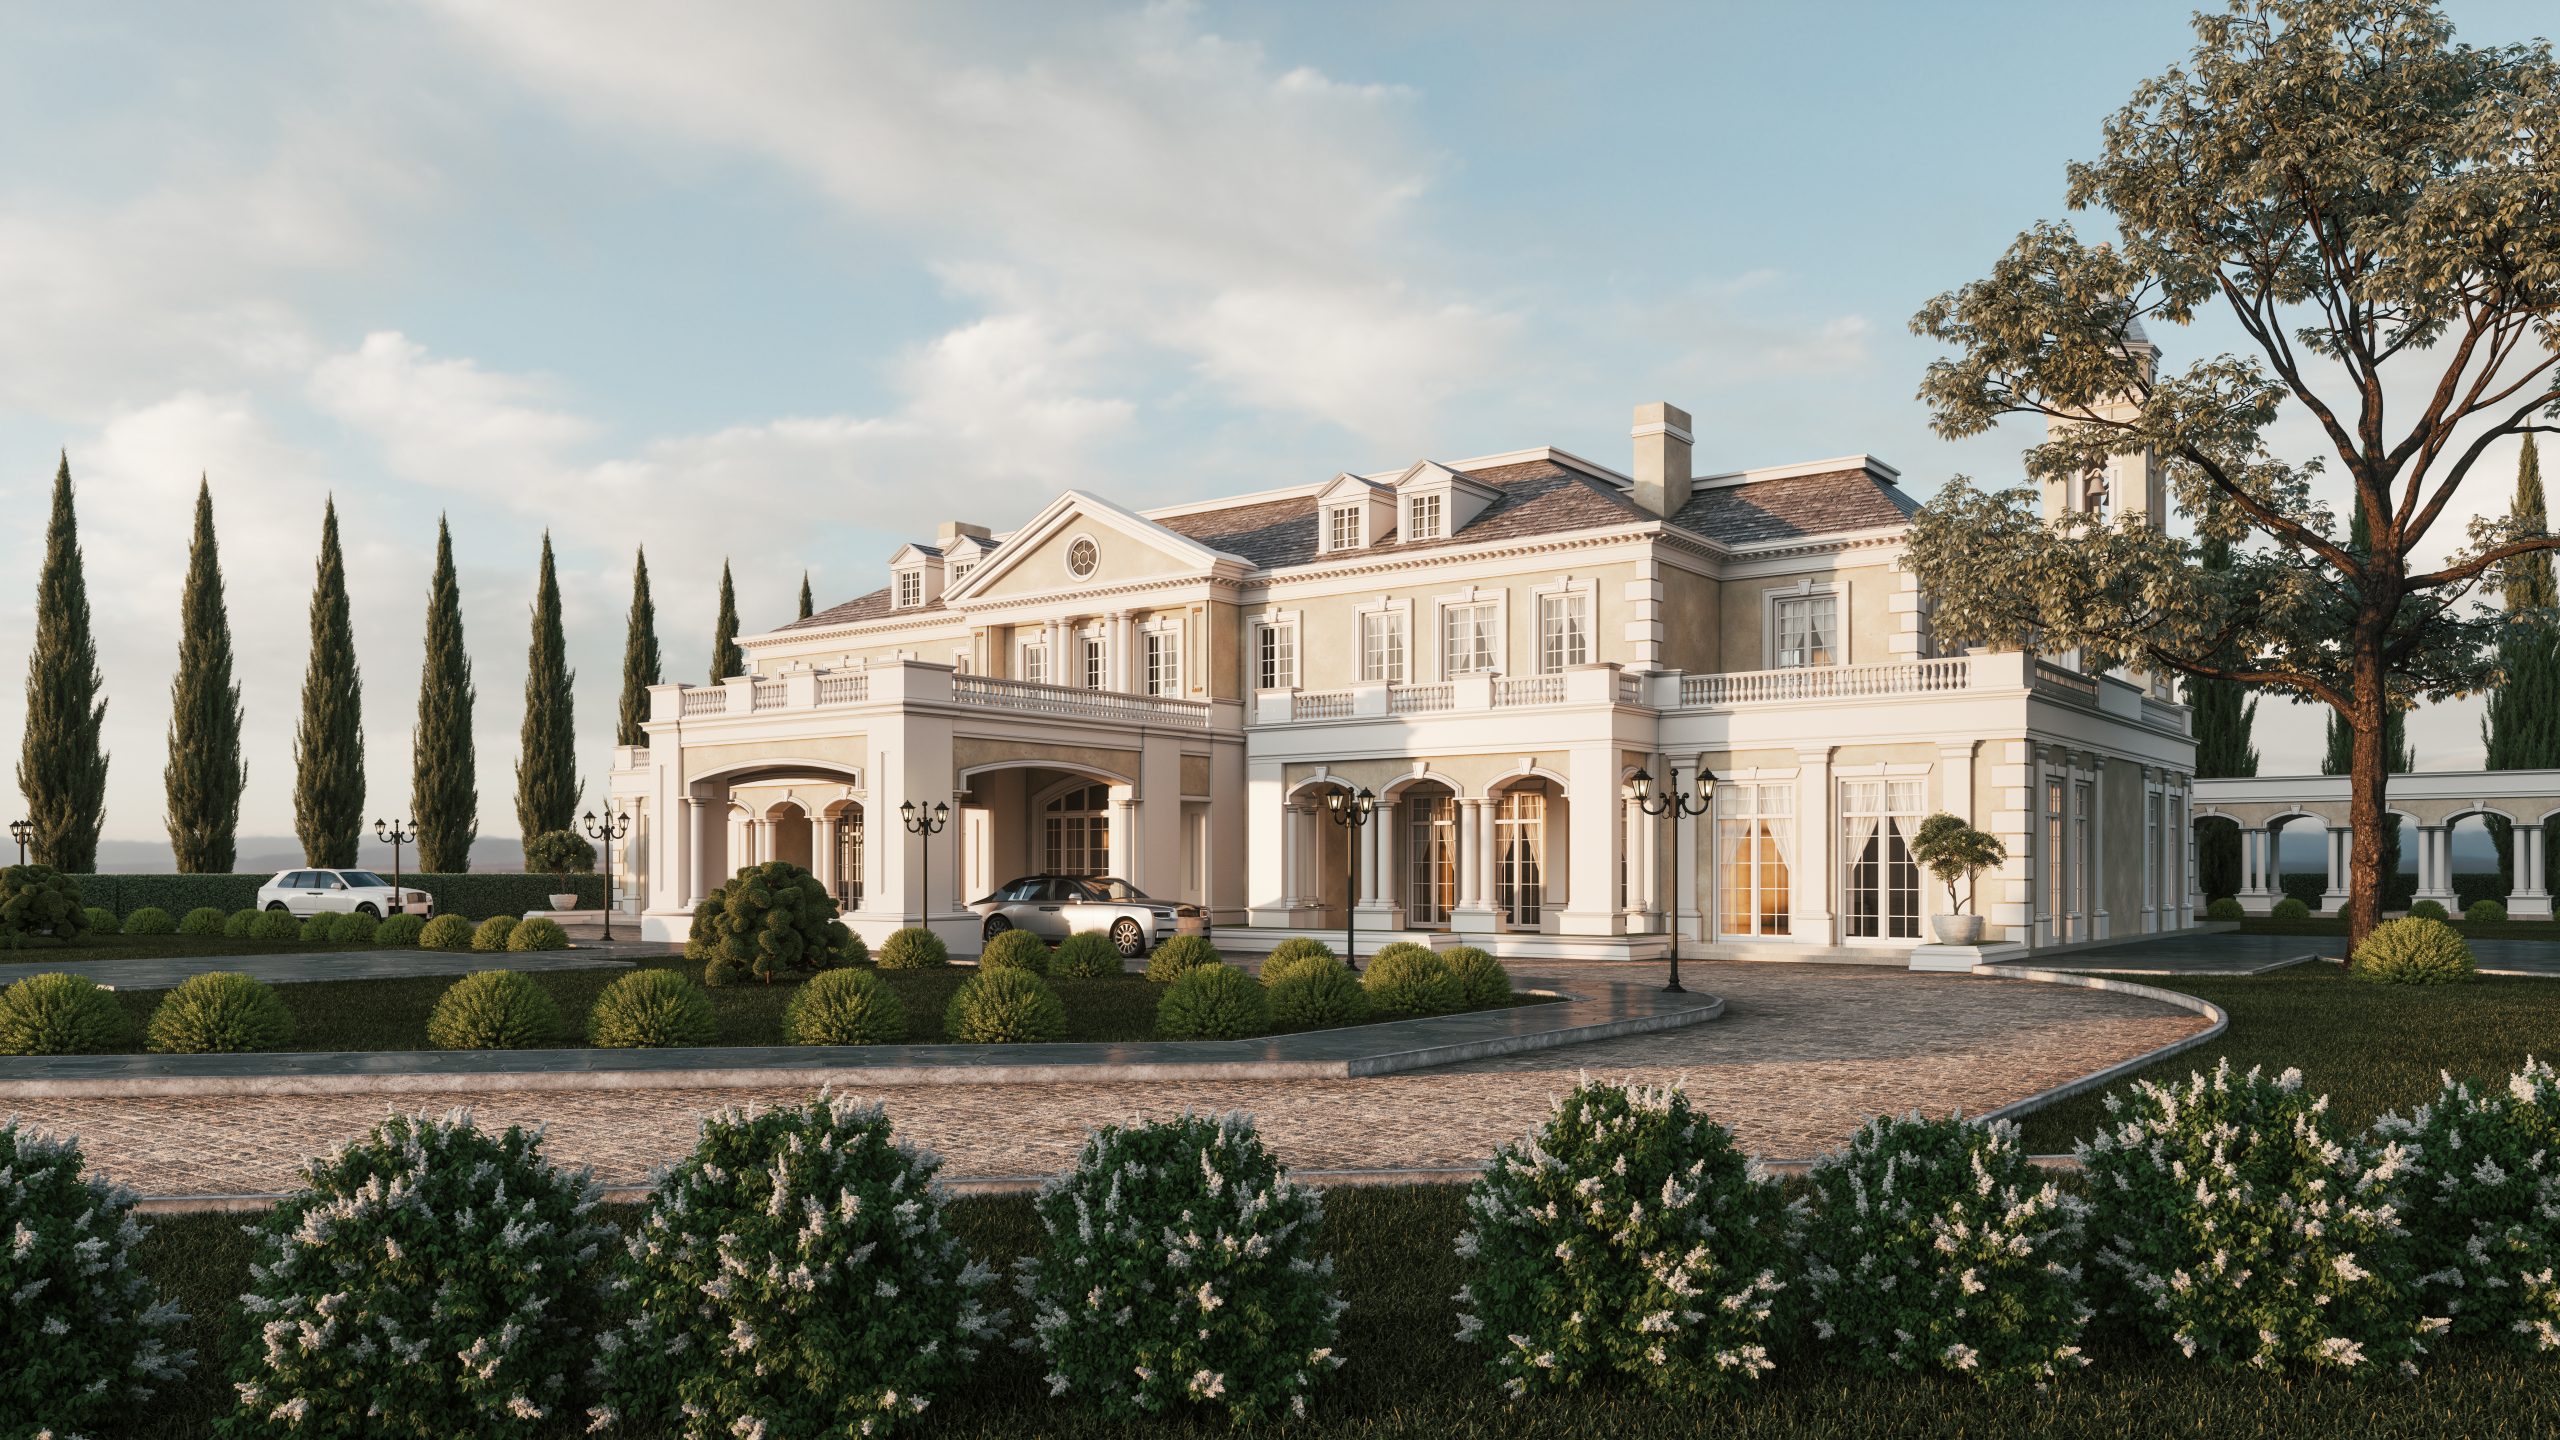 Luxury,Mansion,With,Garden.,Expensive,Cars,In,The,Mansion.,Luxury